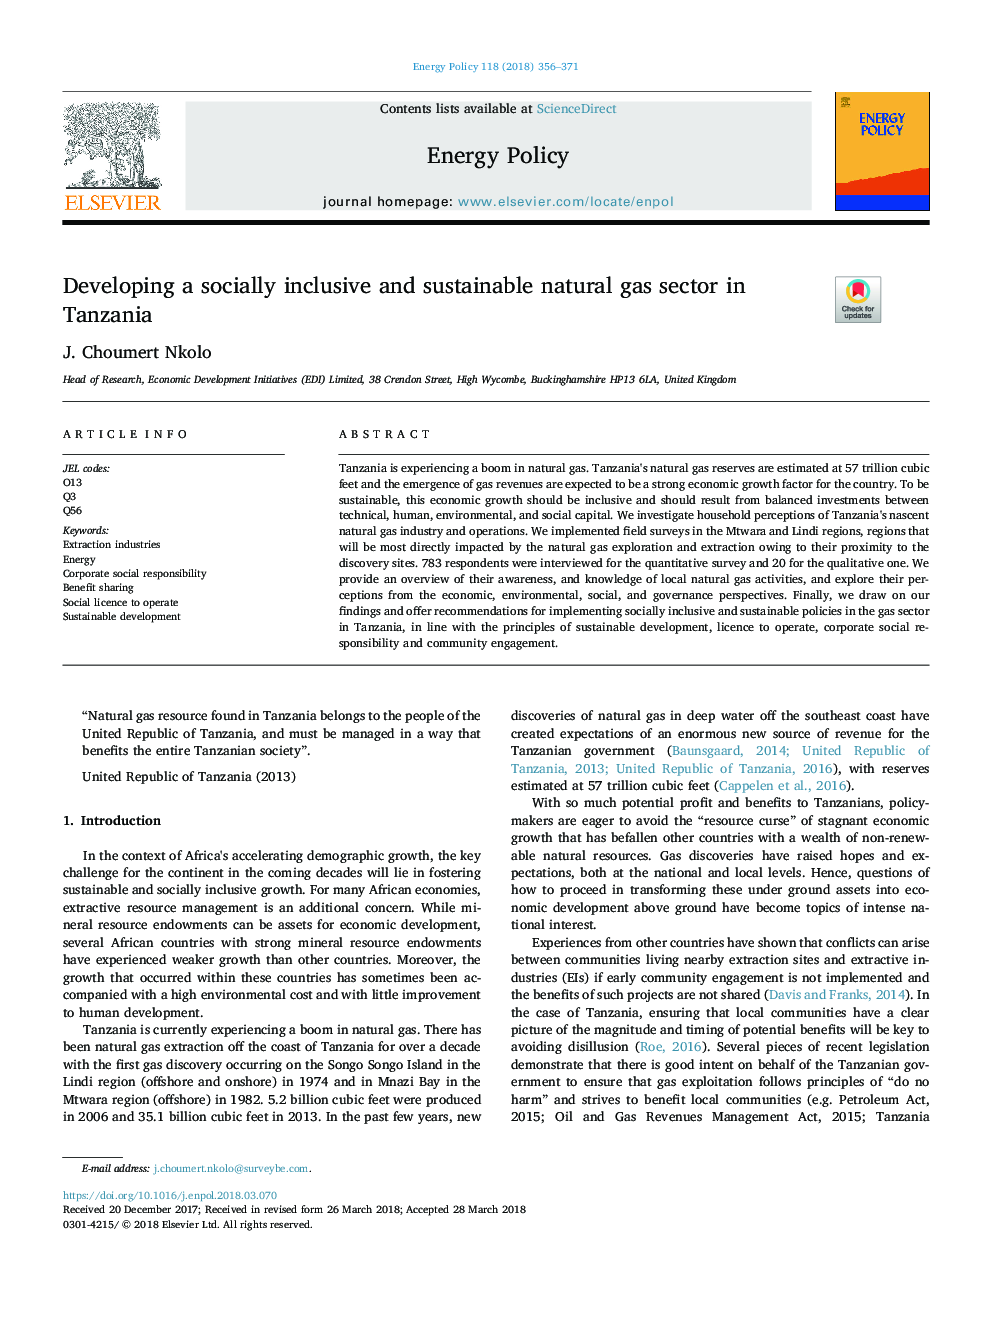 Developing a socially inclusive and sustainable natural gas sector in Tanzania